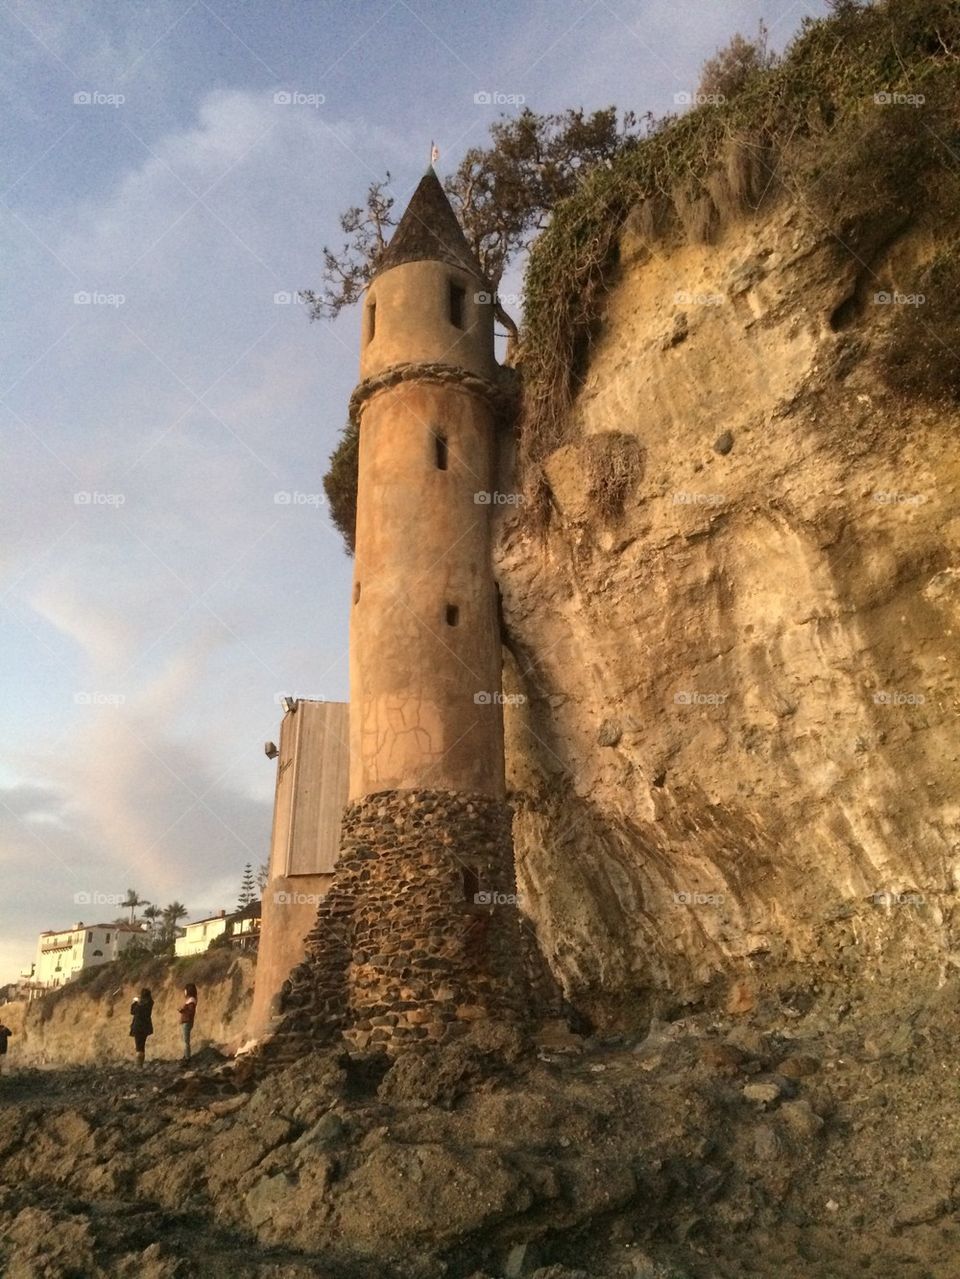 The Pirate Tower